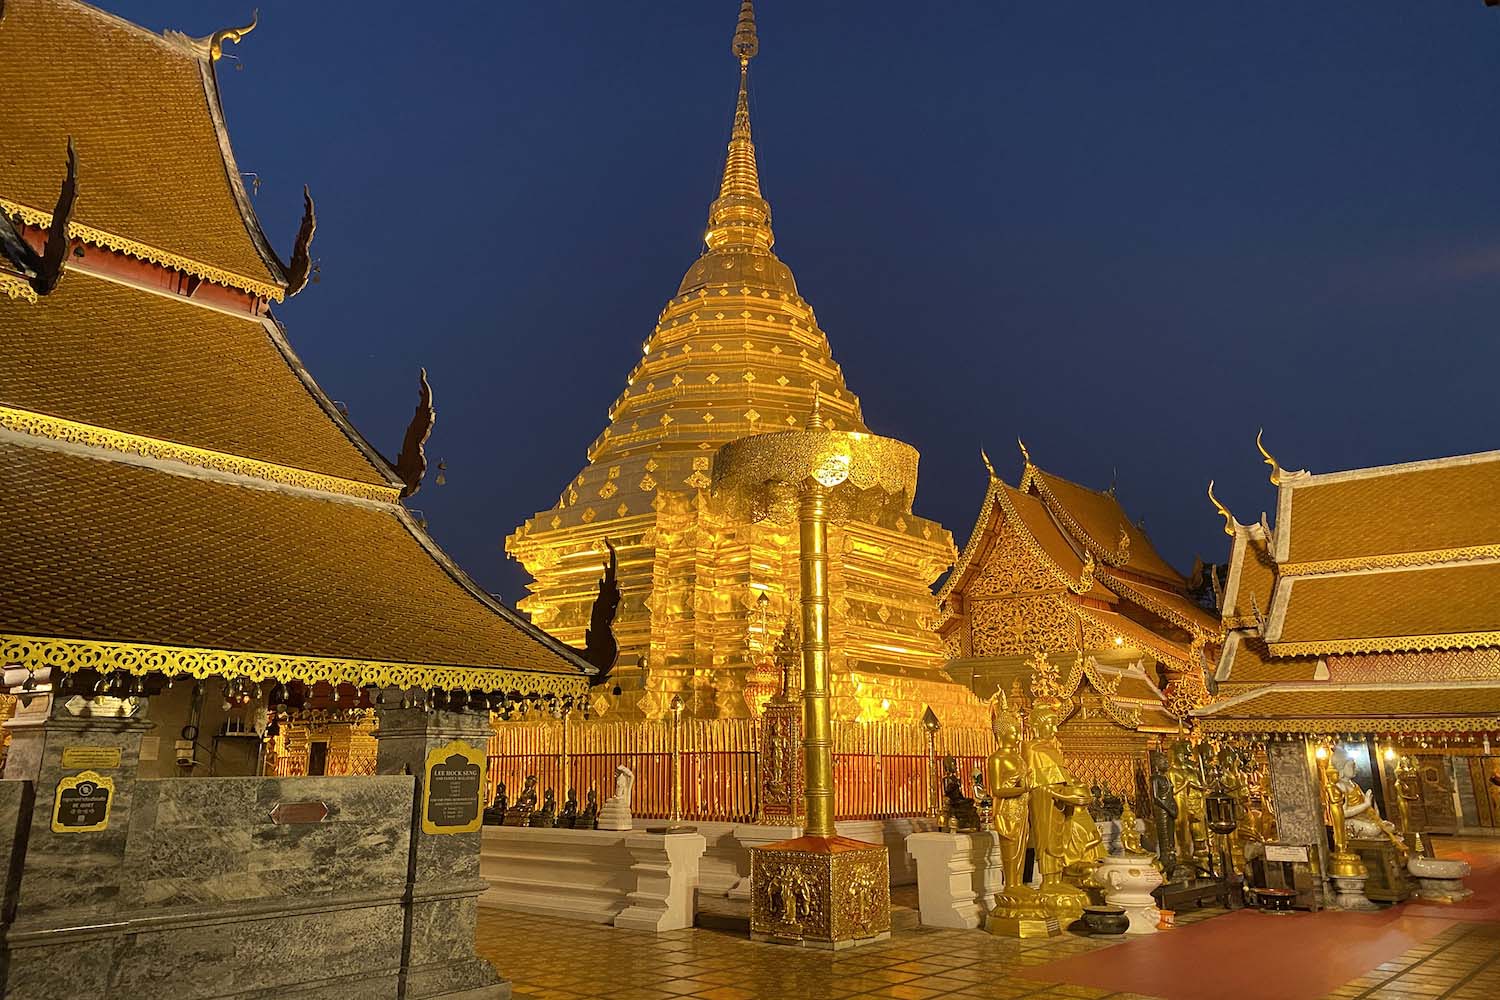 The golden pagoda at Doi Suthep temple at night glowing